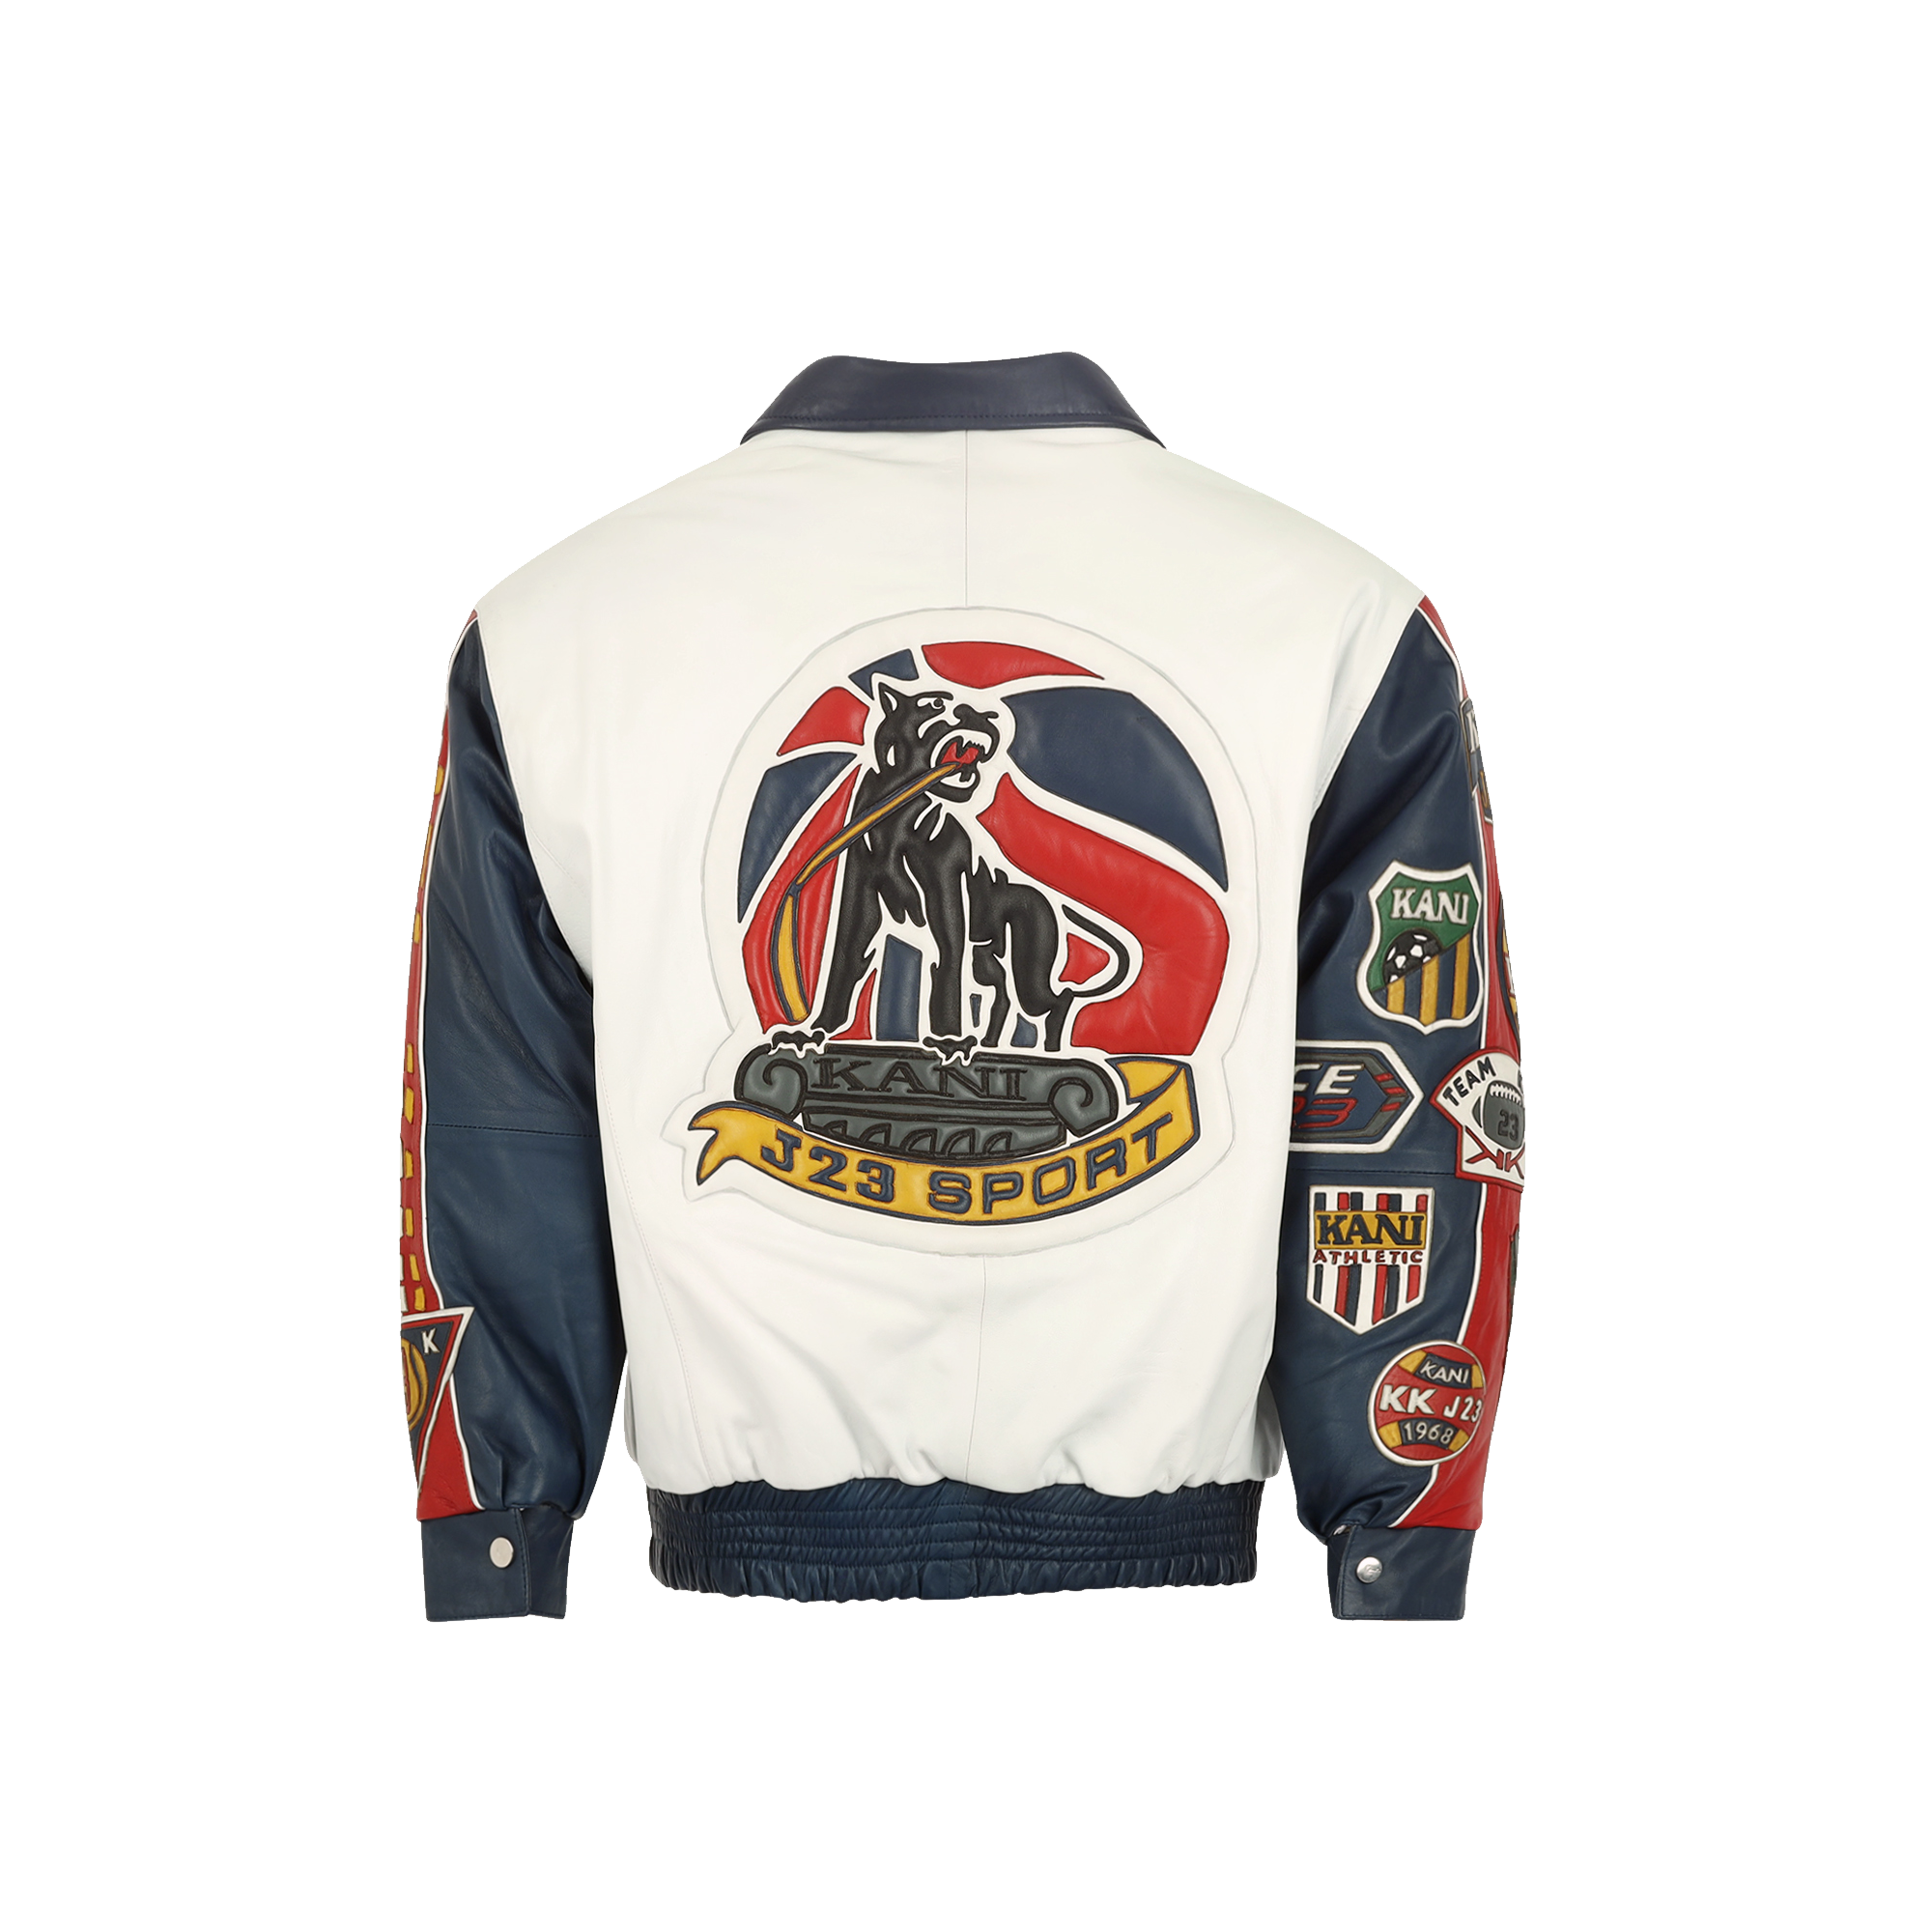 National Naval Aviation Museum - Though flight jackets were initially made  of leather, Nomex versions were introduced in the post-World War II era.  Ornately decorated with a wide variety of patches, this